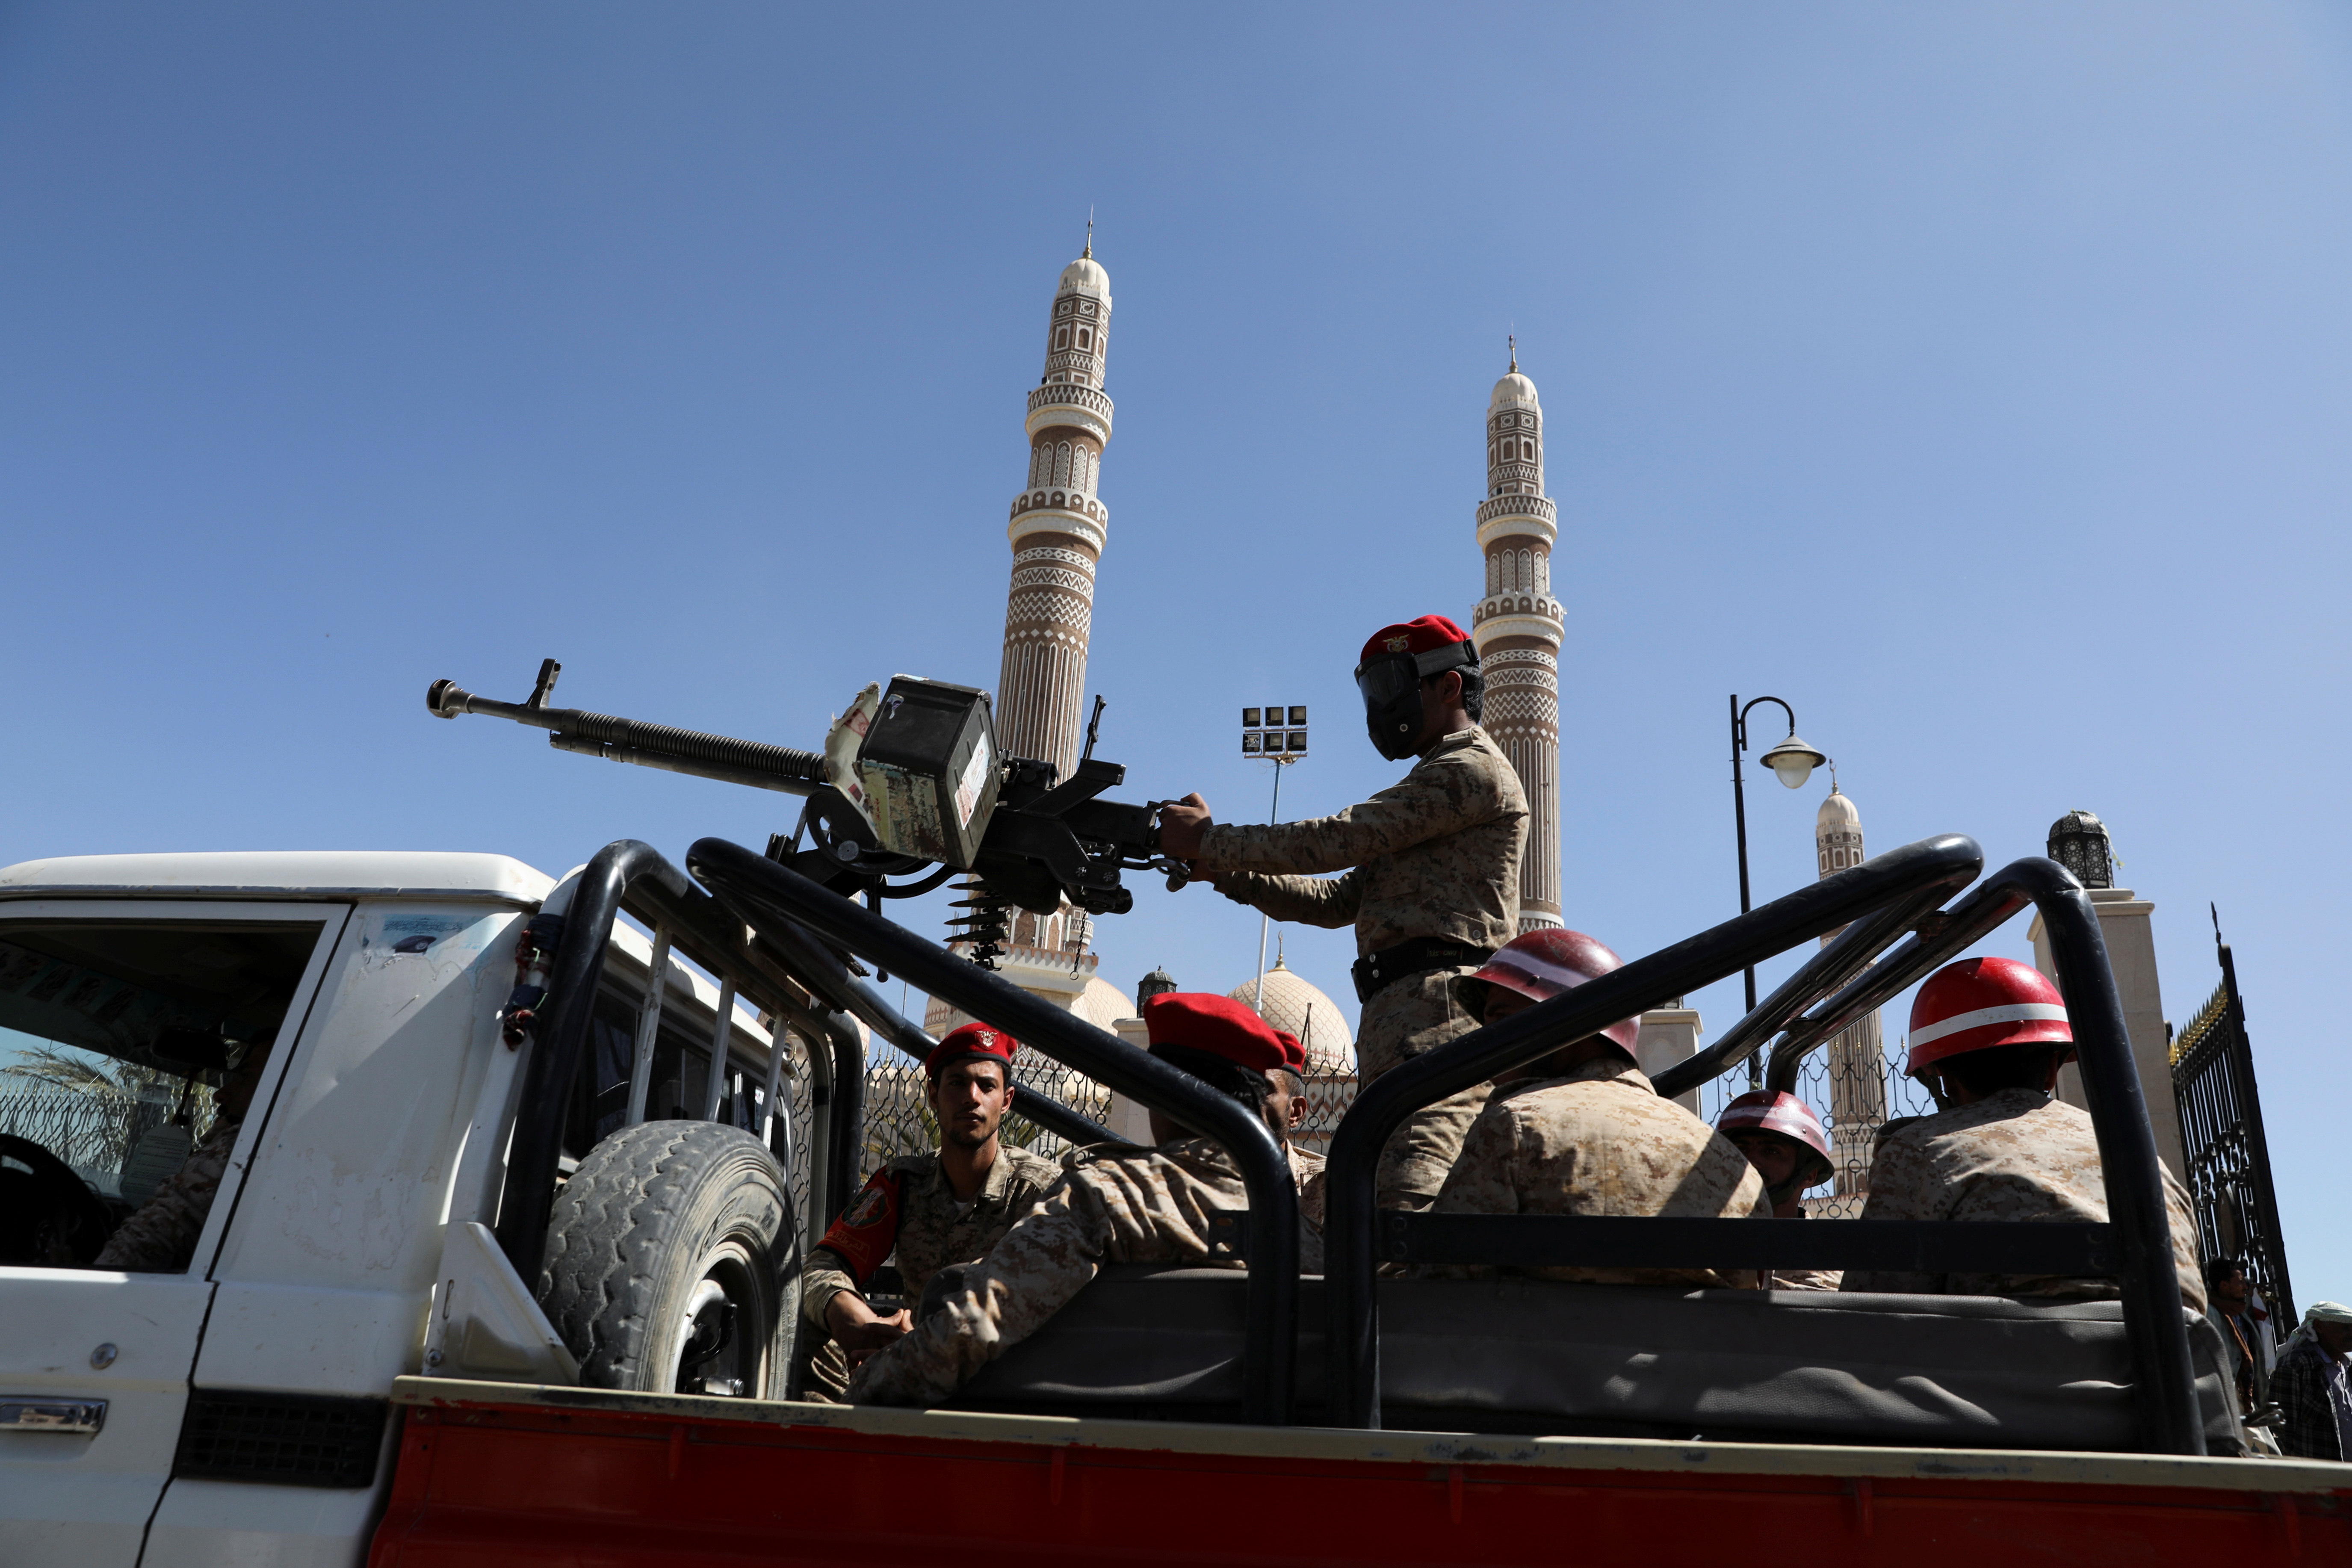 Military policemen ride on the back of a patrol truck at the site of a funeral of Houthi fighters killed during recent fighting against government forces, in Sanaa, Yemen December 6, 2021. REUTERS/Khaled Abdullah